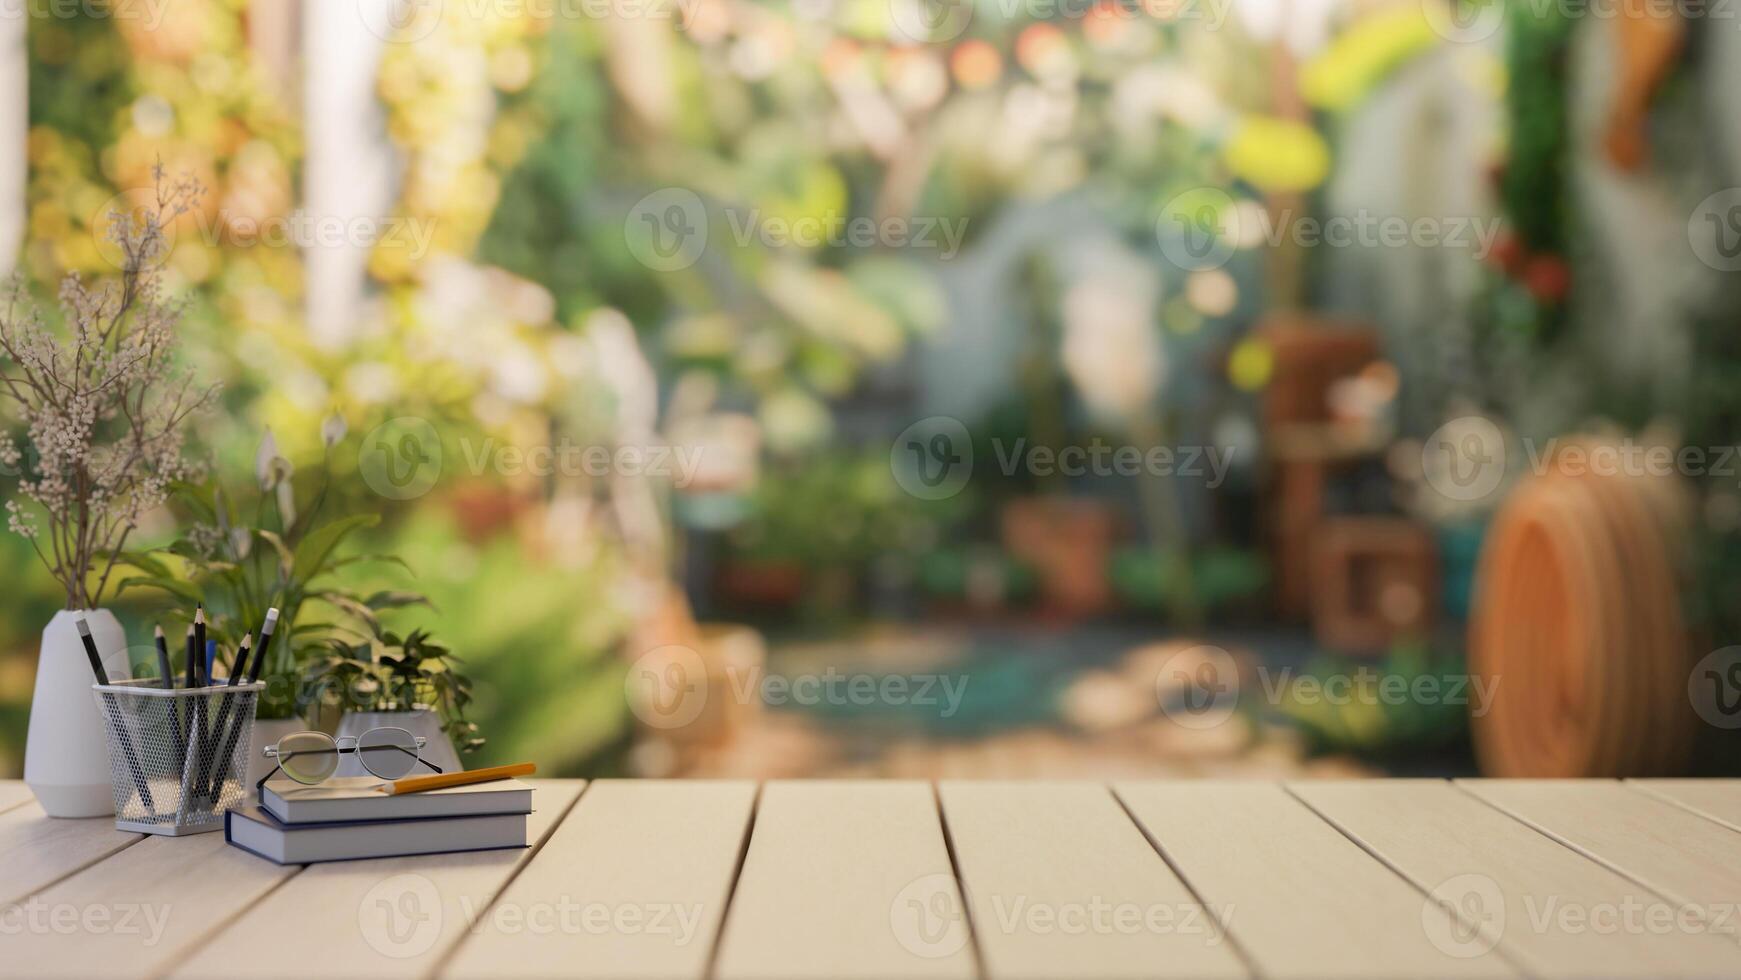 A wooden table against the blurred background of a beautiful tropical backyard garden. photo